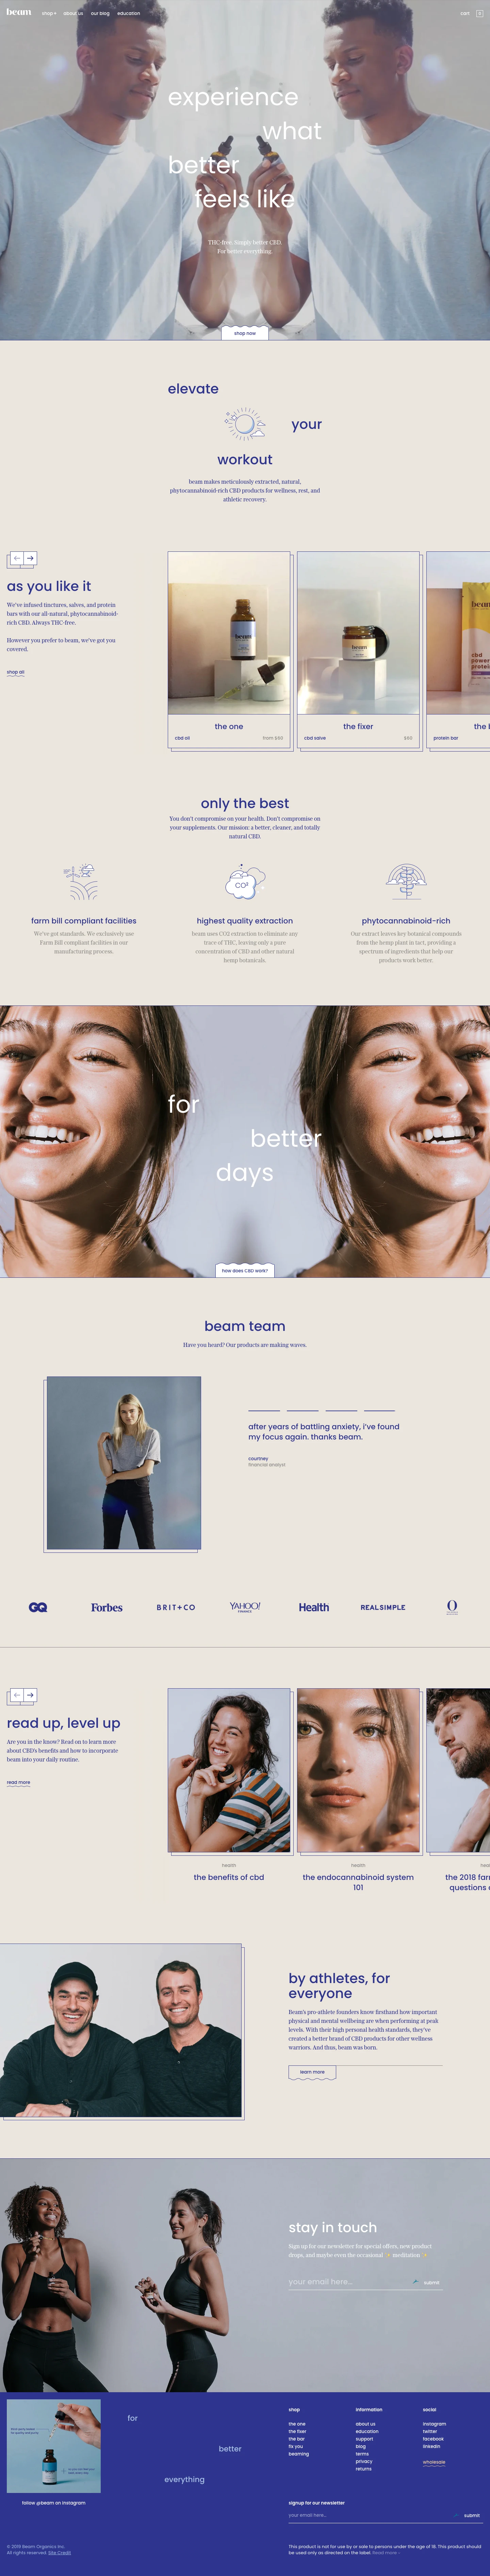 beam Landing Page Example: beam makes meticulously extracted, natural, phytocannabinoid-rich CBD products for wellness, rest, and athletic recovery.